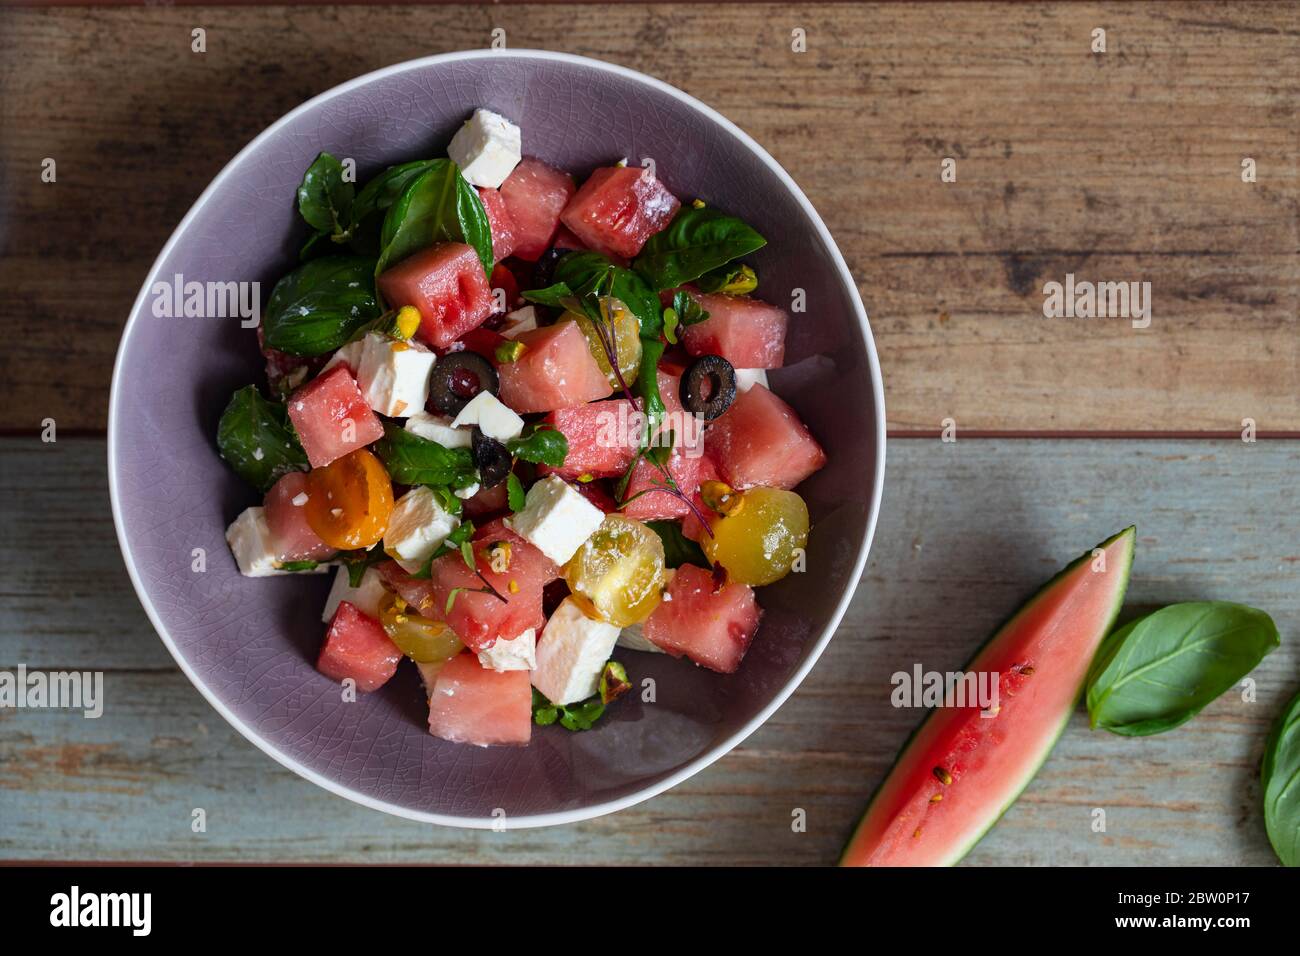 Summer salad with watermelon, tomatoes, feta cheese and basil Stock Photo